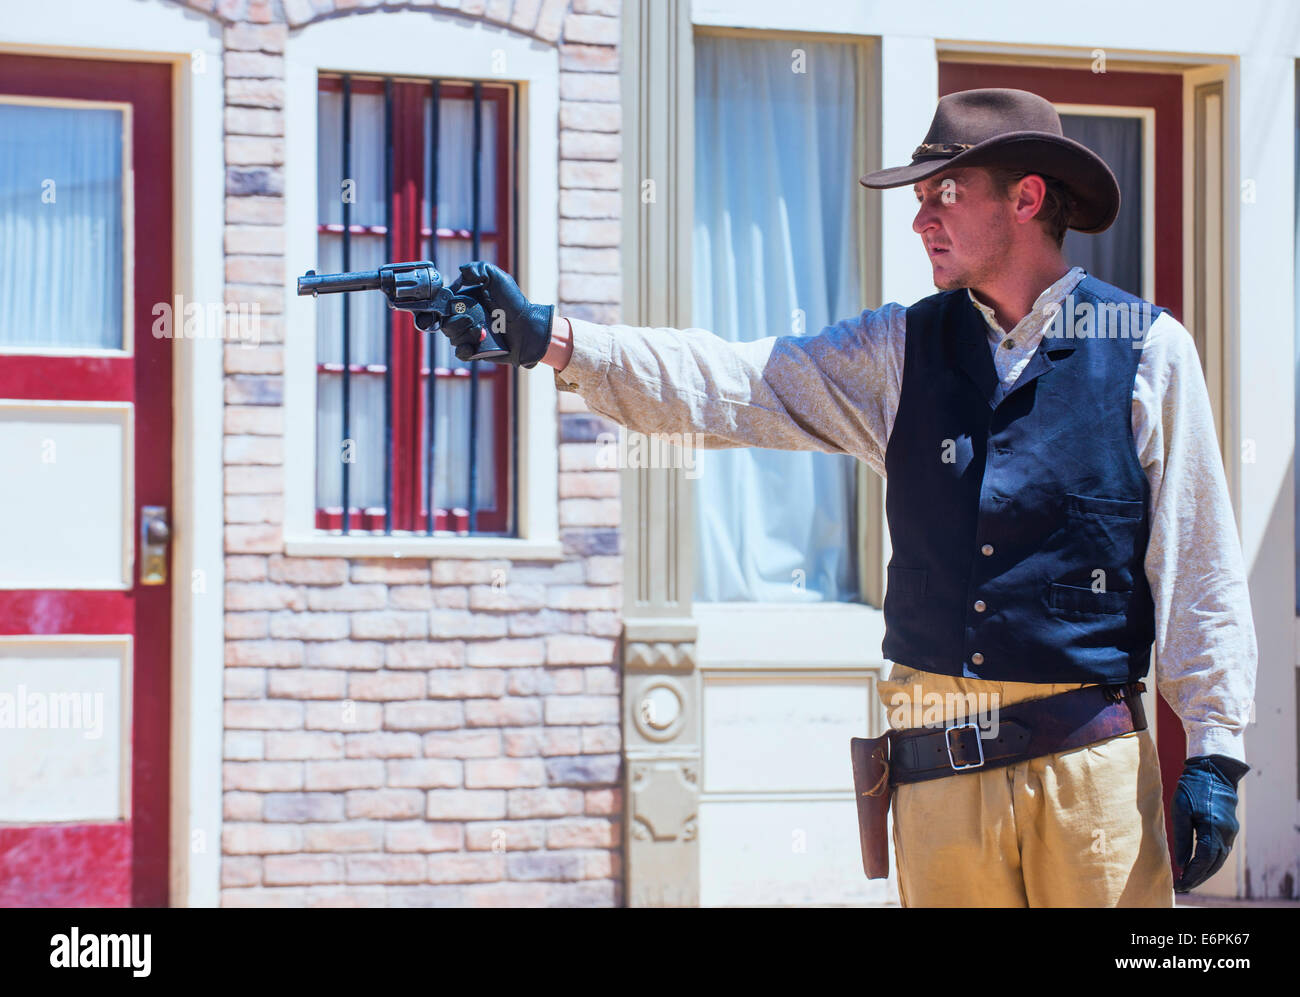 Actor takes part in the Re-enactment of the OK Corral gunfight in Tombstone , Arizona Stock Photo